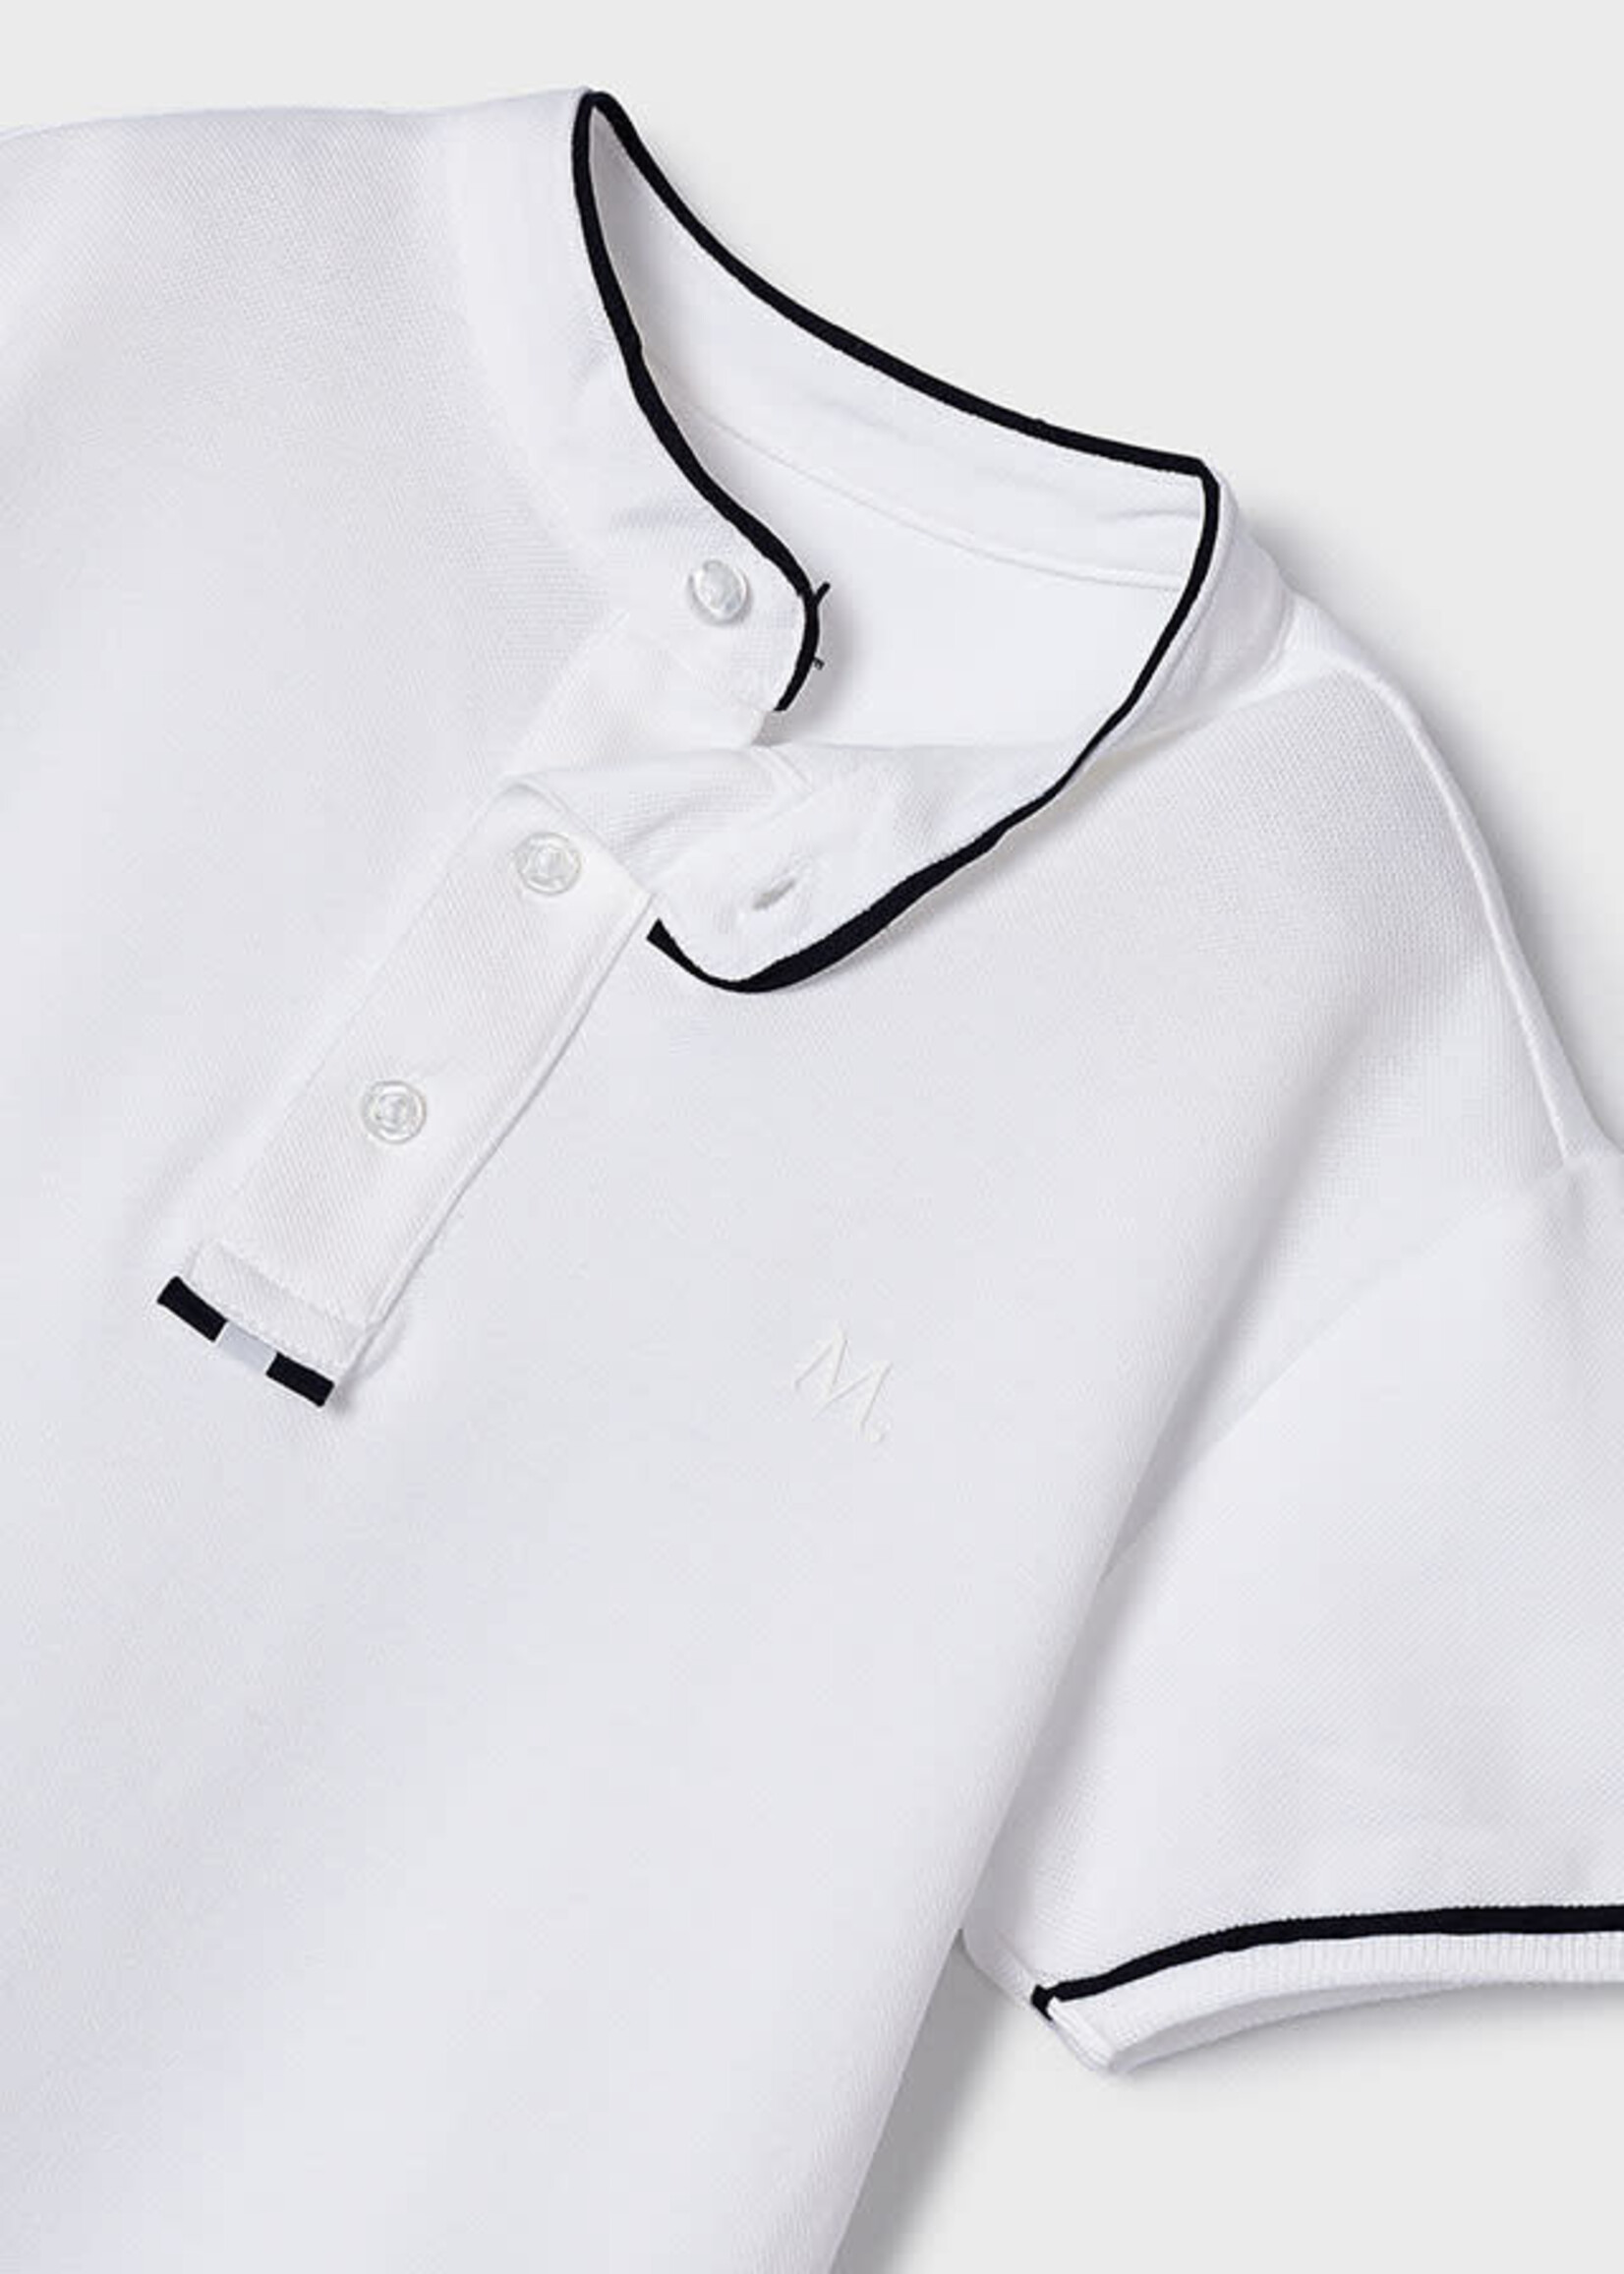 Mayoral Mayoral Polo s/s mao neck White - 24 03102